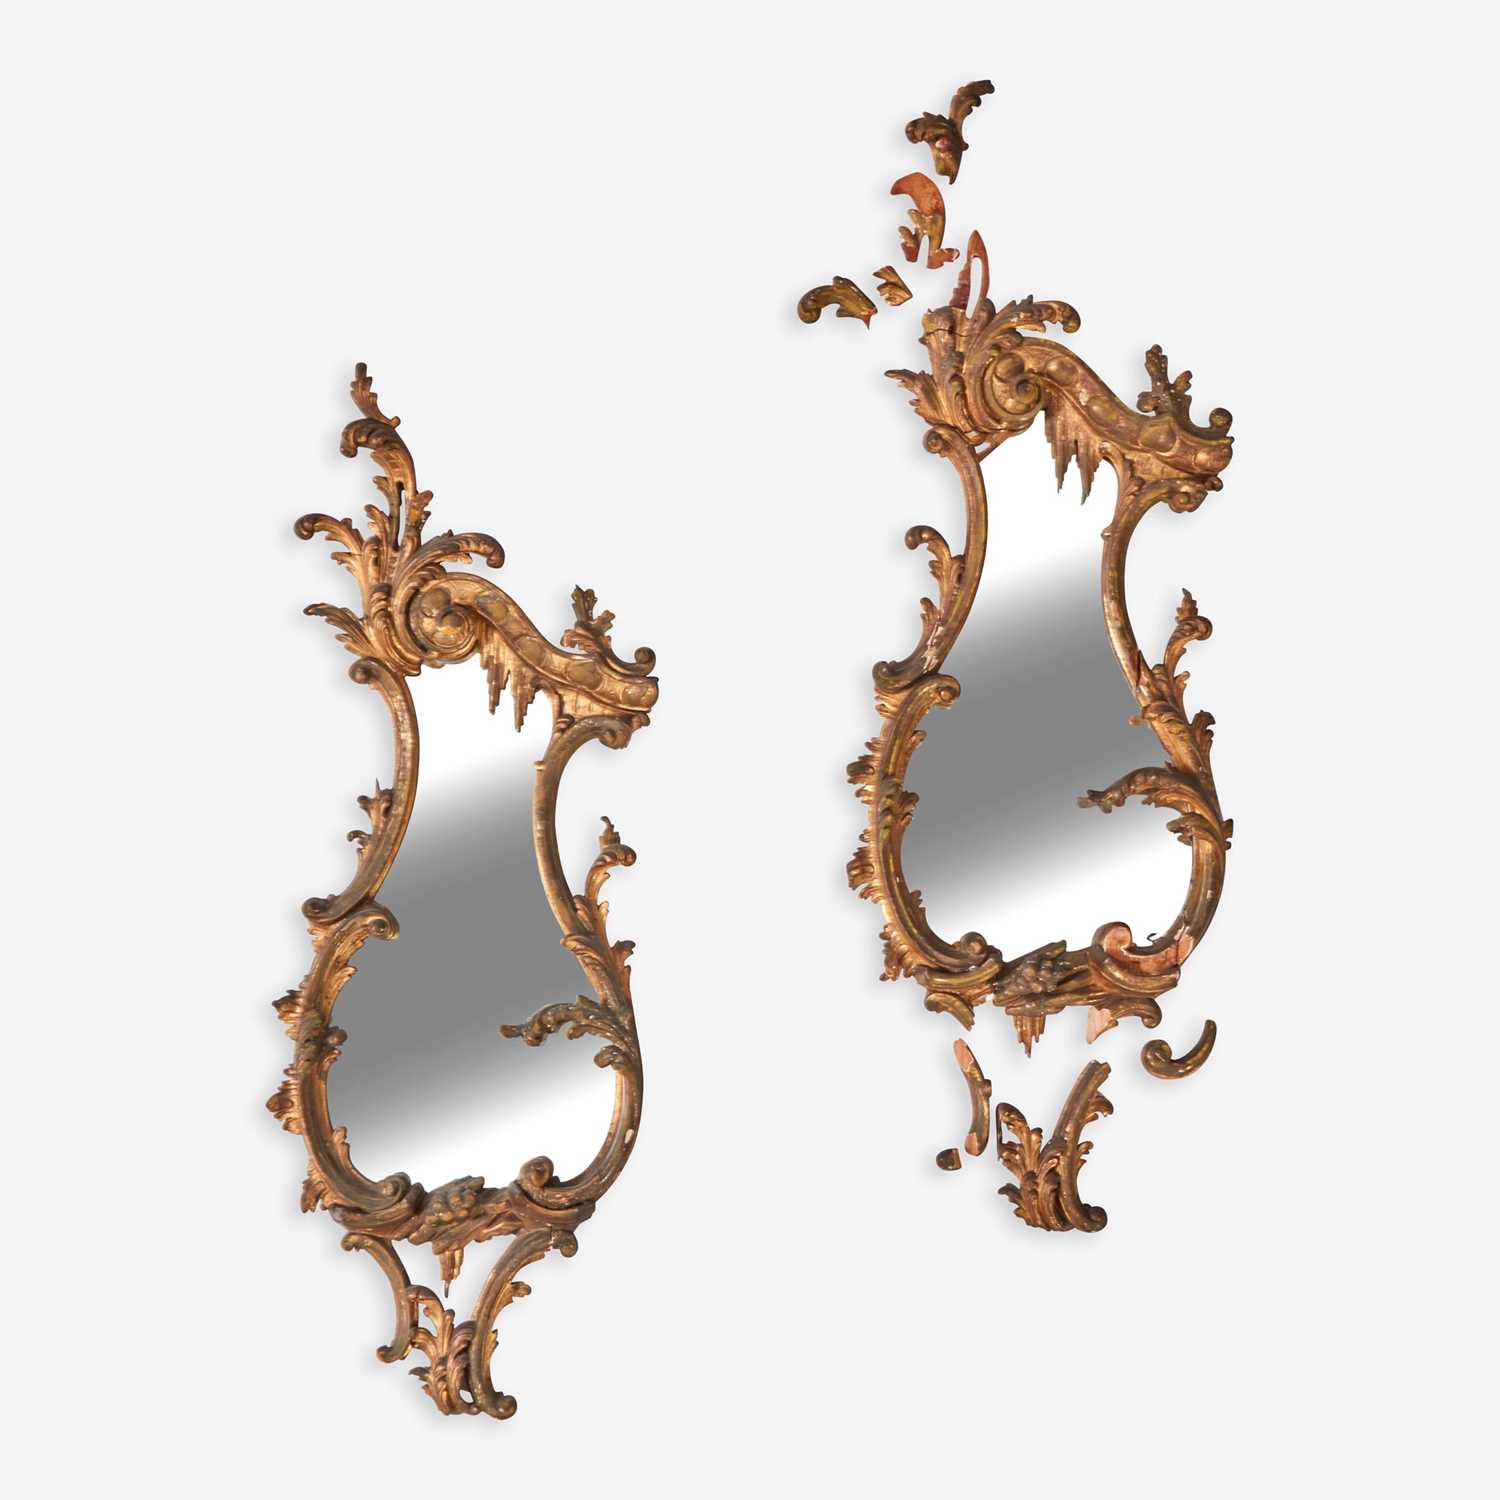 Lot 84 - A Pair of George III Carved Giltwood Cartouche Mirrors